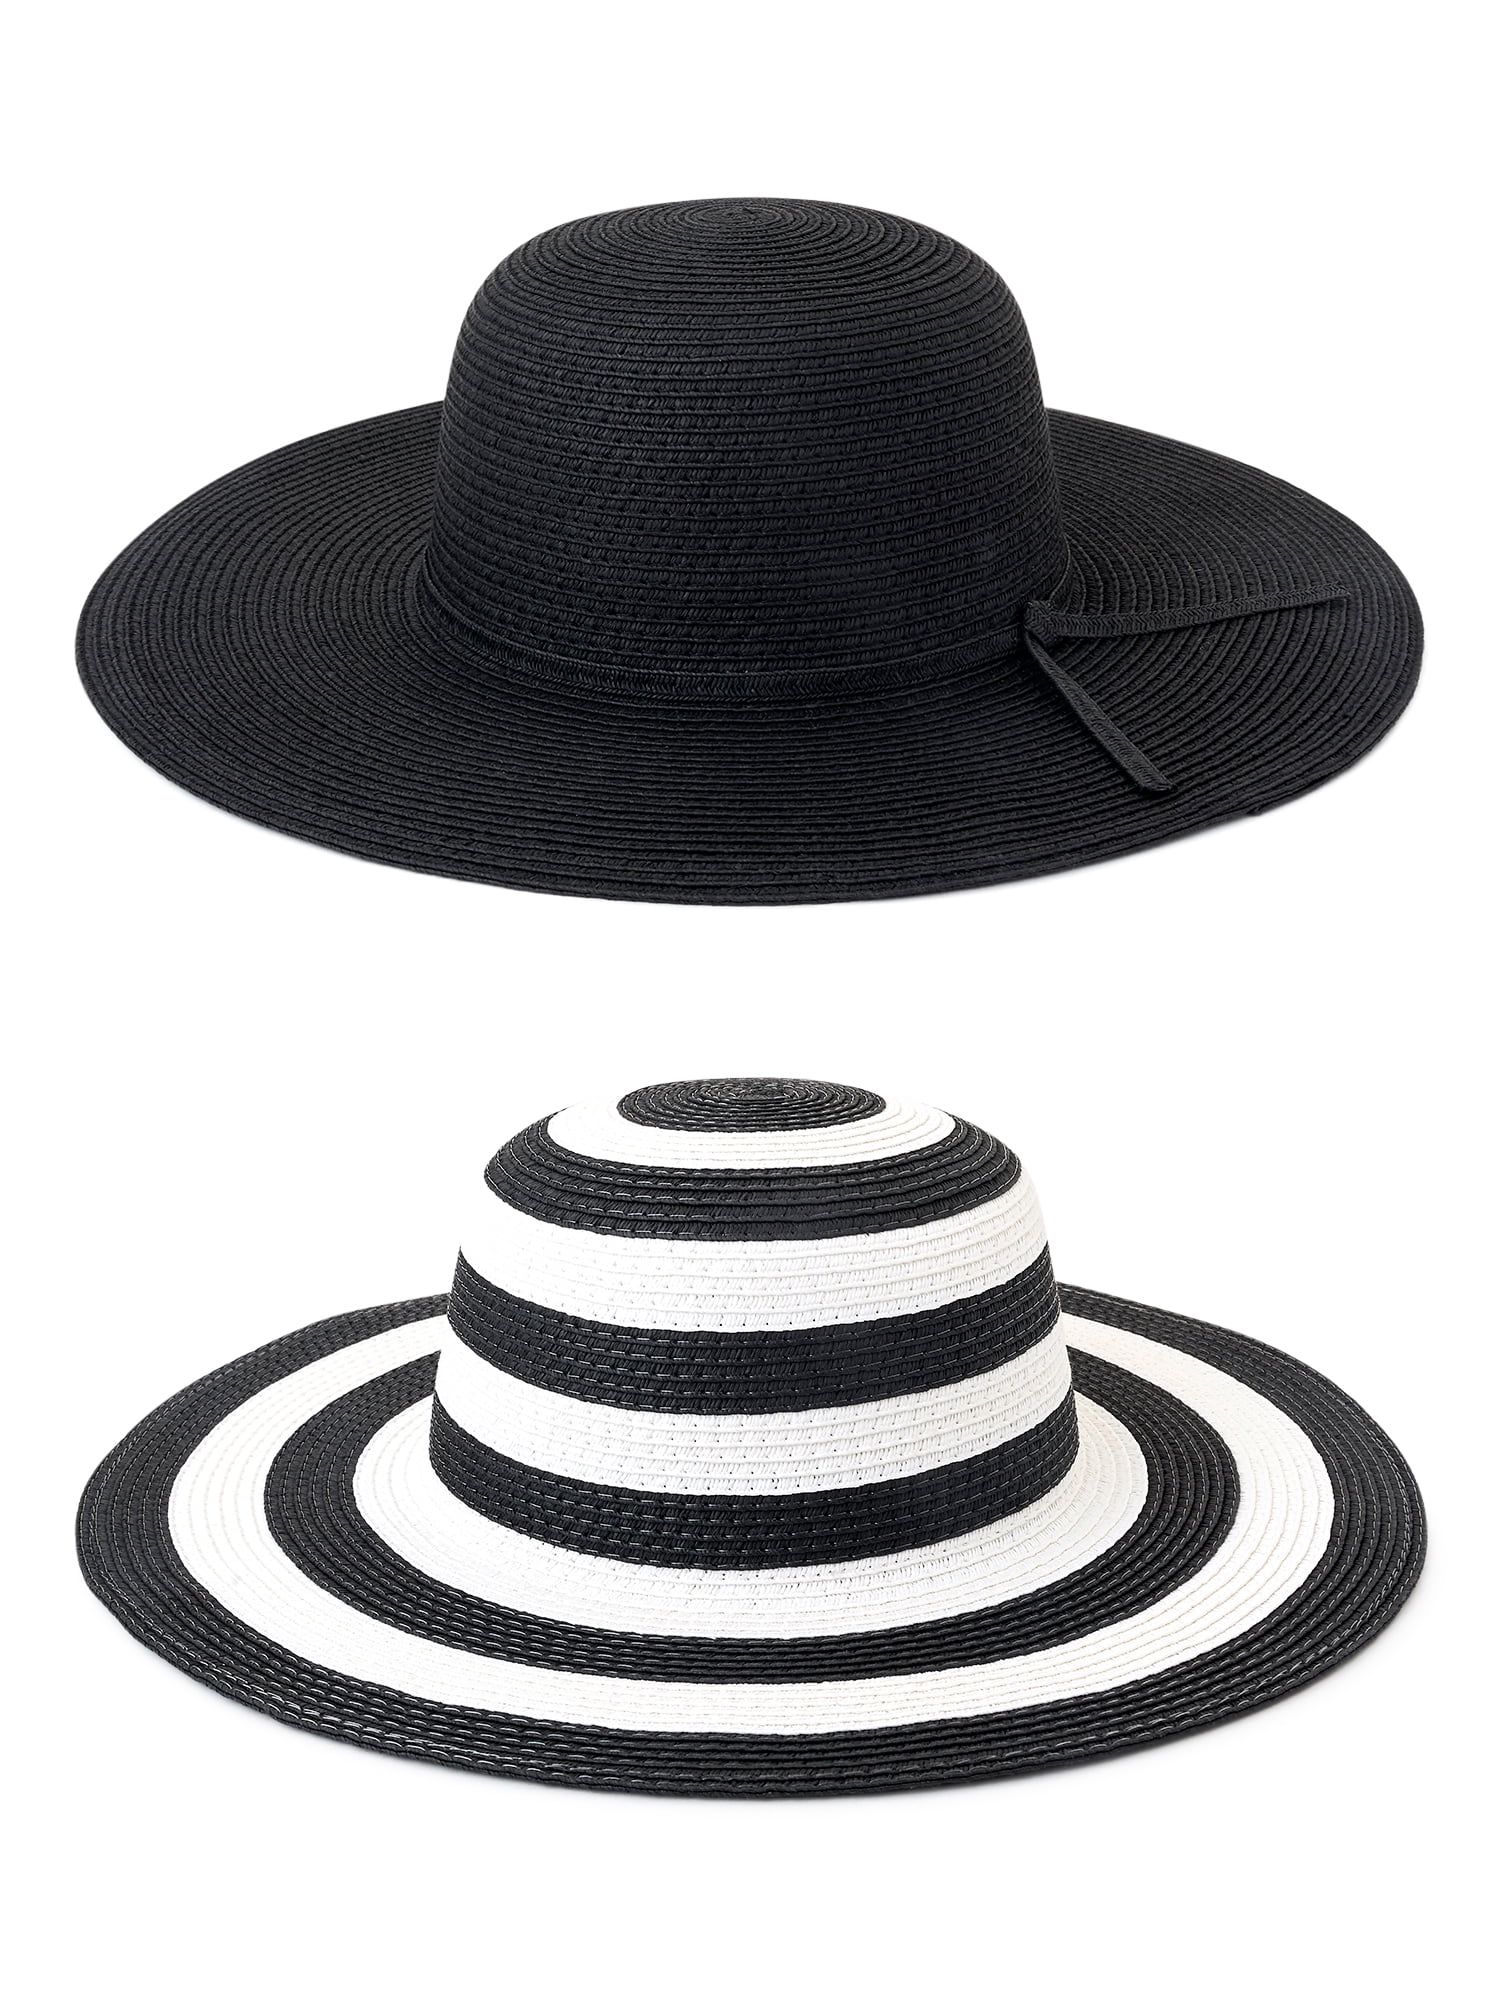 Time and Tru Women's Straw Floppy Hats, 2-Pack | Walmart (US)